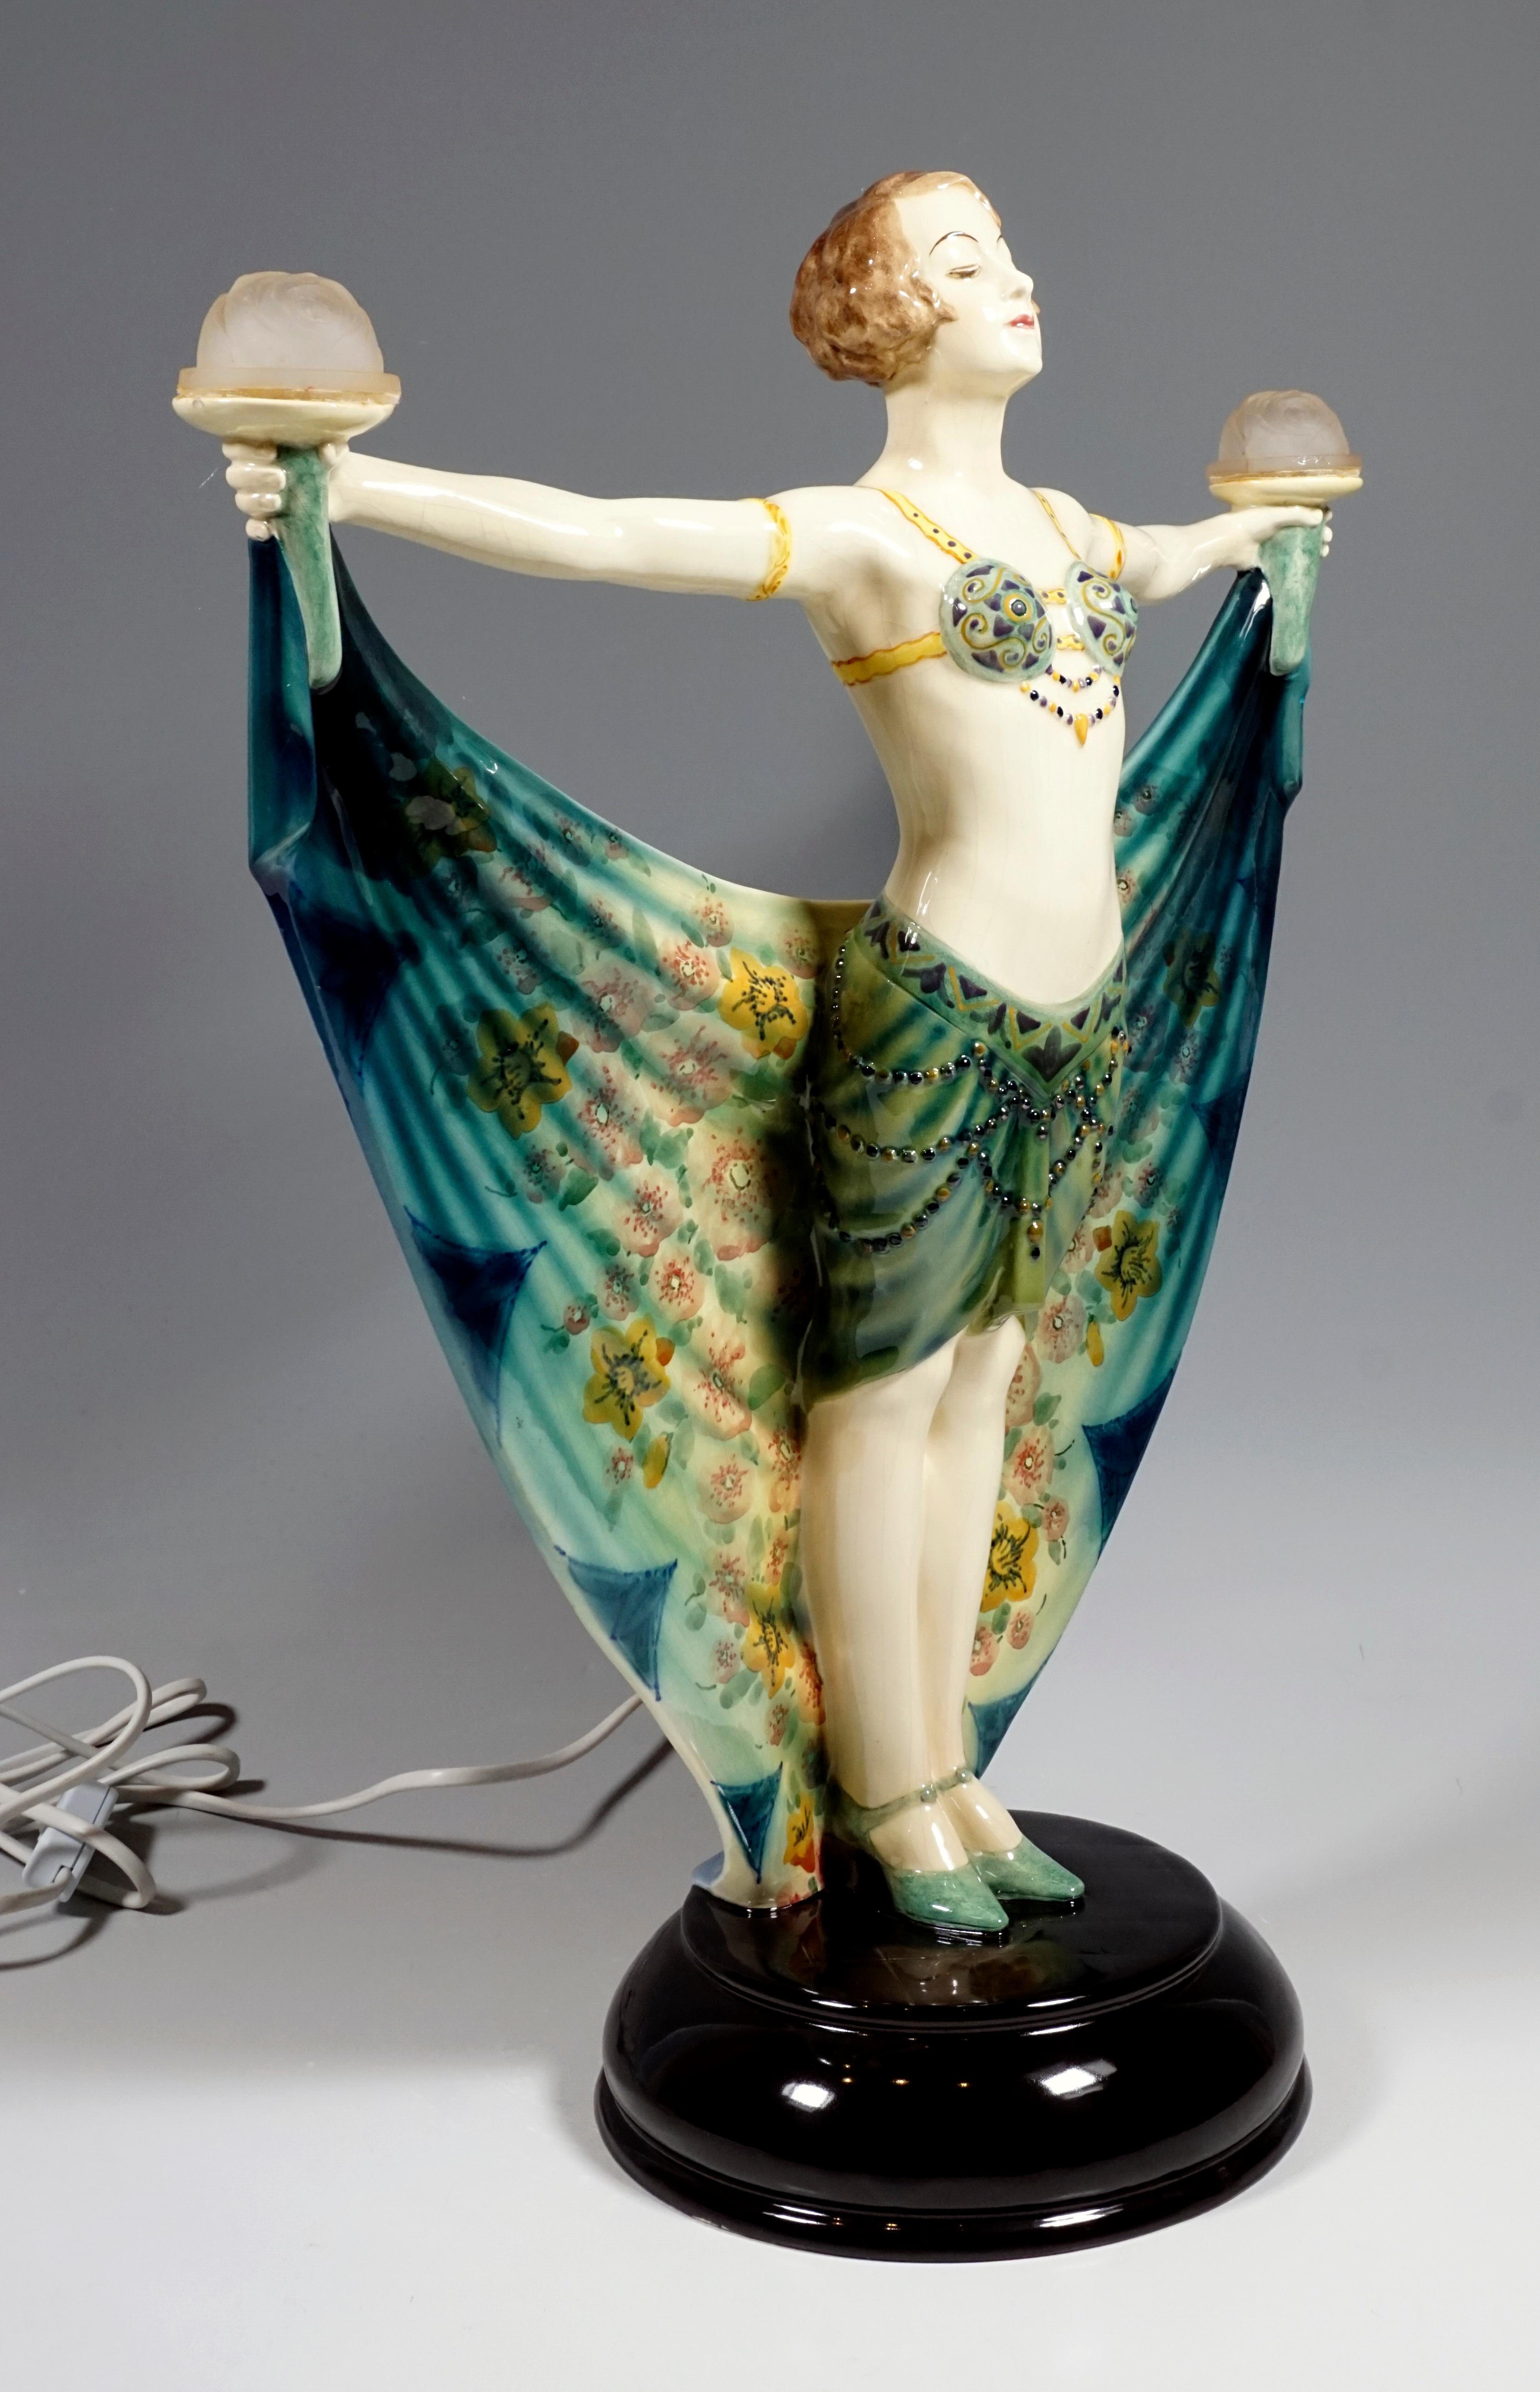 Very rare goldscheider ceramic figure
Most likely Dolores Del Rio, a Mexican film actress, is depicted. She wears a delicate bustier, which essentially consists of two green, ornate shells, which are held together by ribbons and chains, and a short